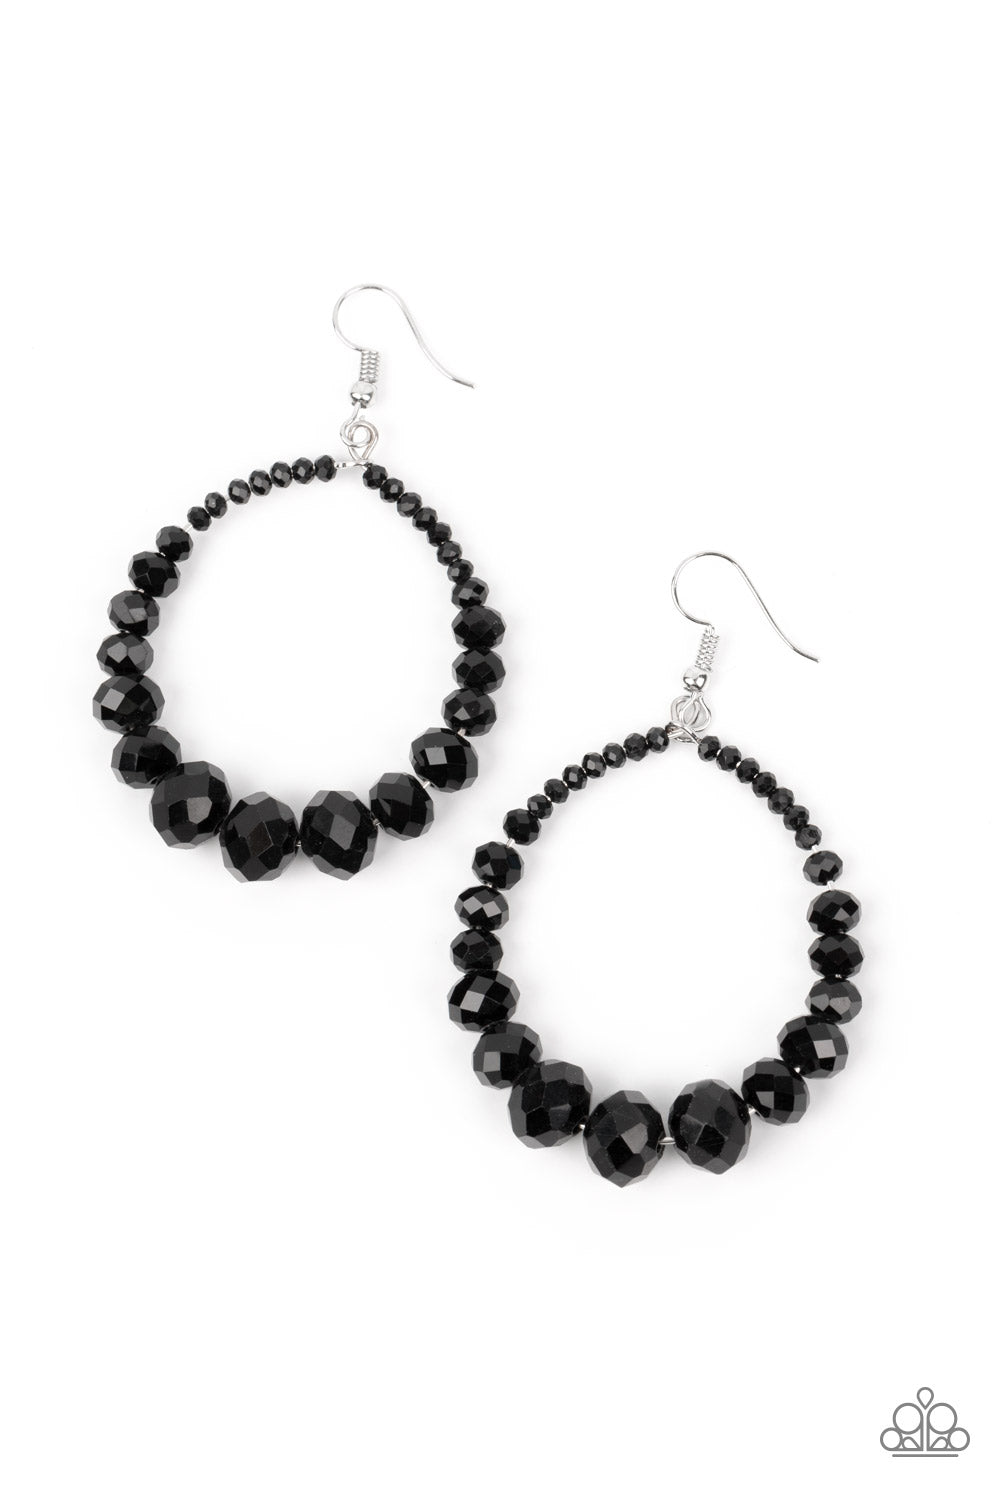 flashy faceted finish, glittery black gems gradually increase in size as they glide along a wire hoop